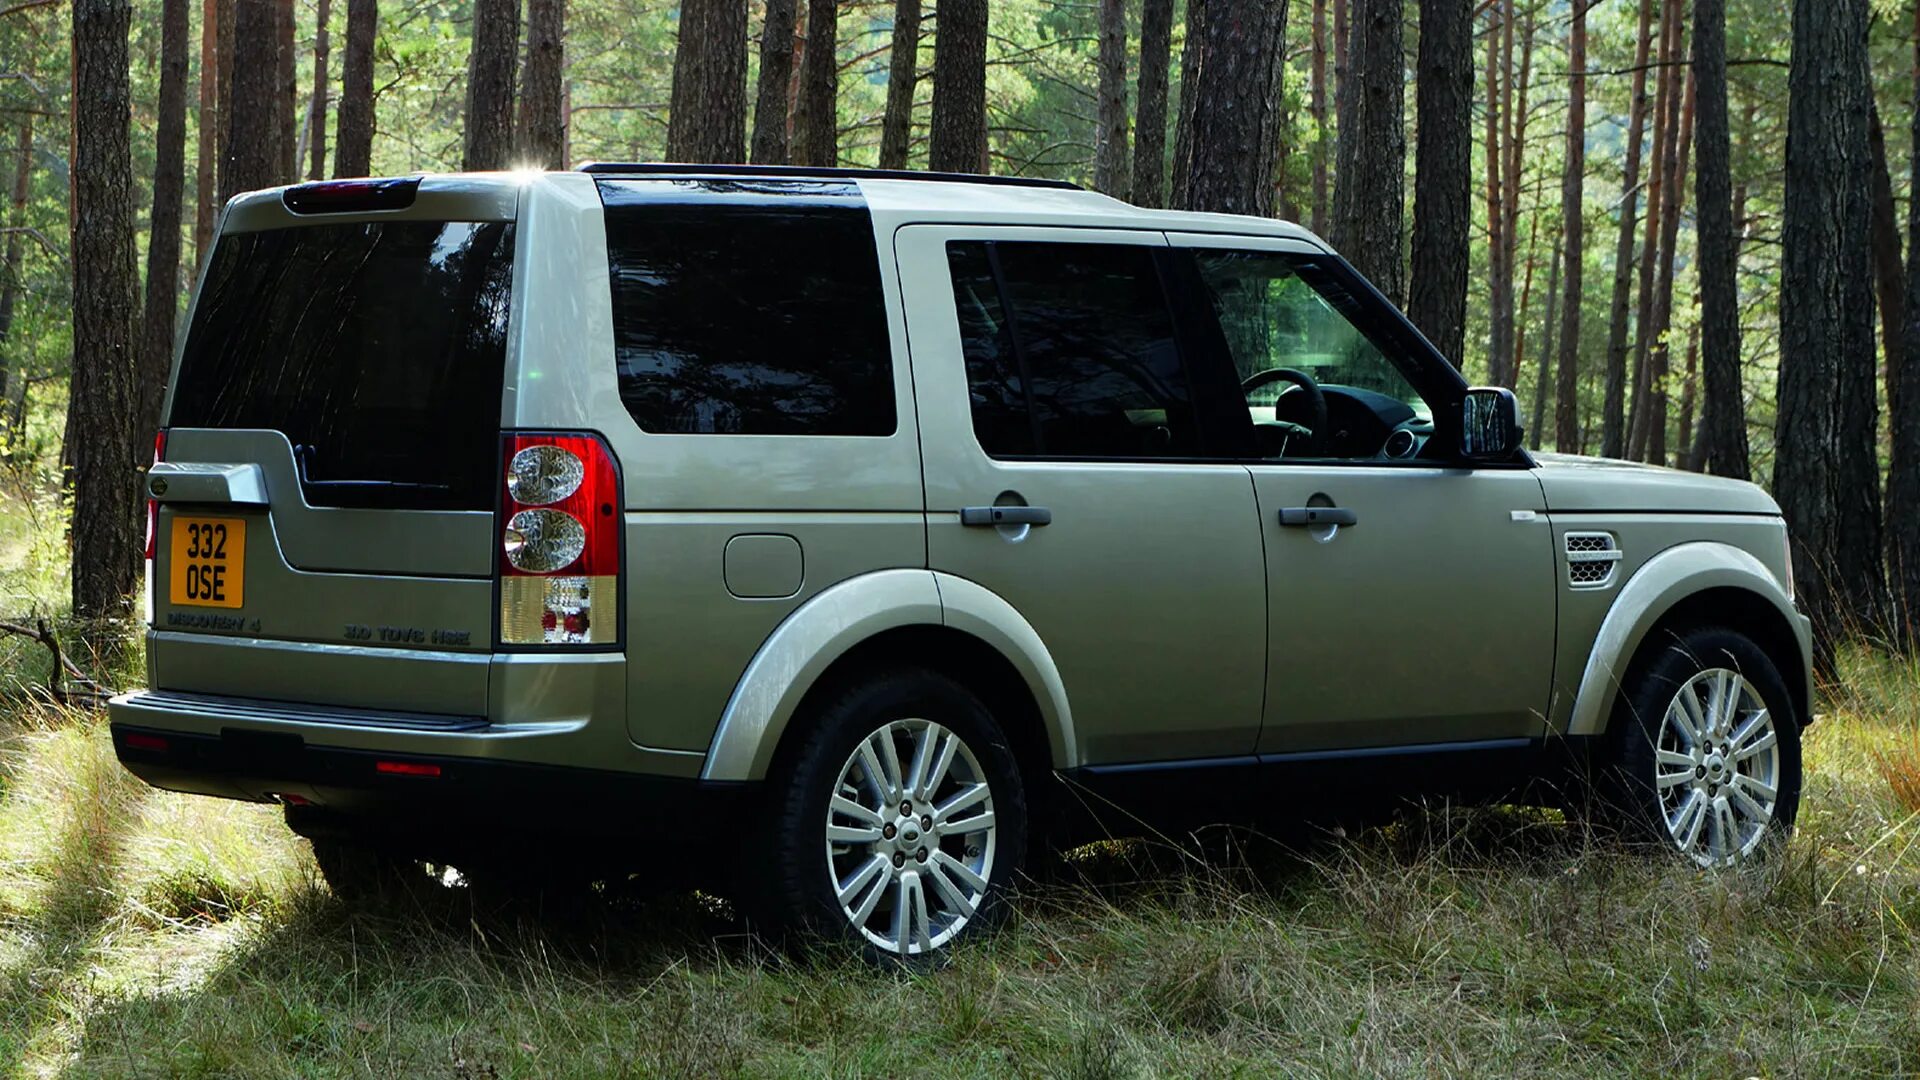 Land Rover Discovery 4. Ленд Ровер Дискавери 4 2009. Лэнд ровыер Дискавери 4. Ленд Ровер Дискавери 4 2014.